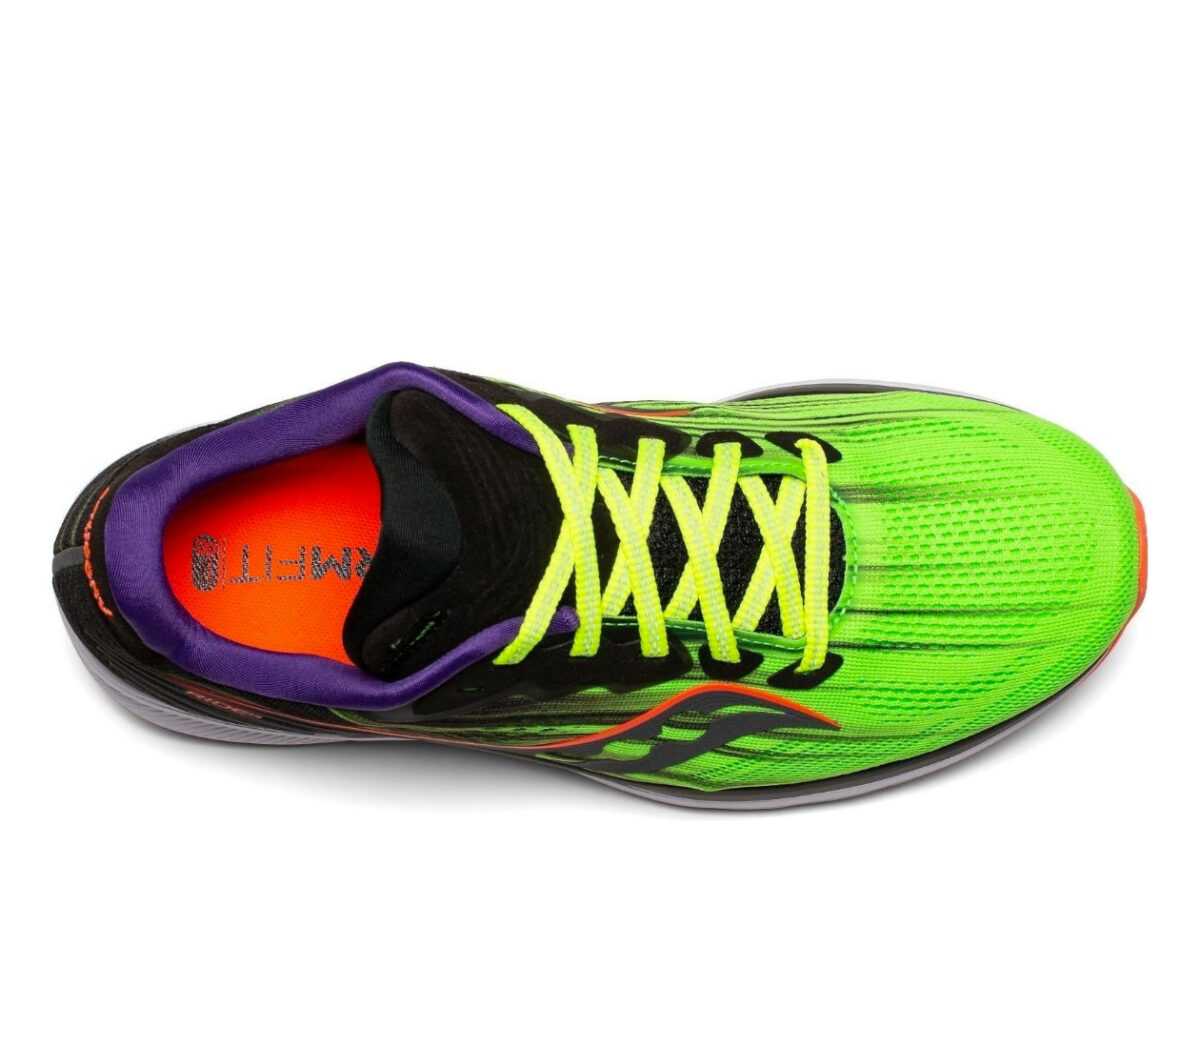 tomaia scarpa running donna saucony ride 14 verde fluo